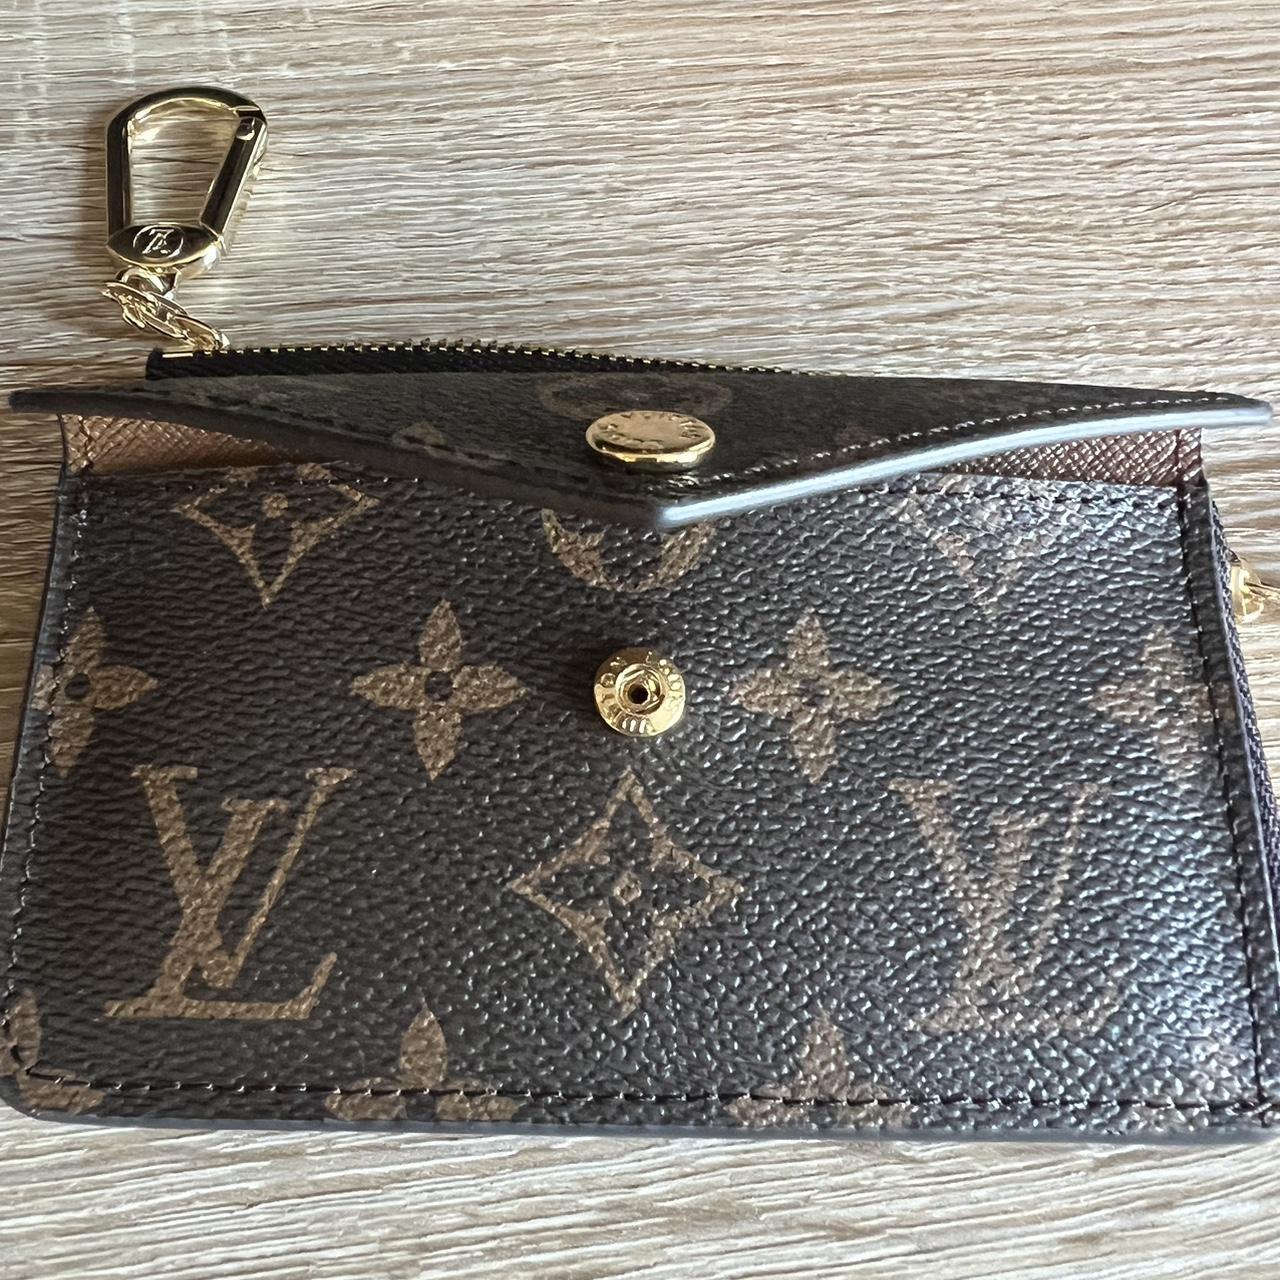 LV Small key chain/wallet “Recto Verso”. Don’t use